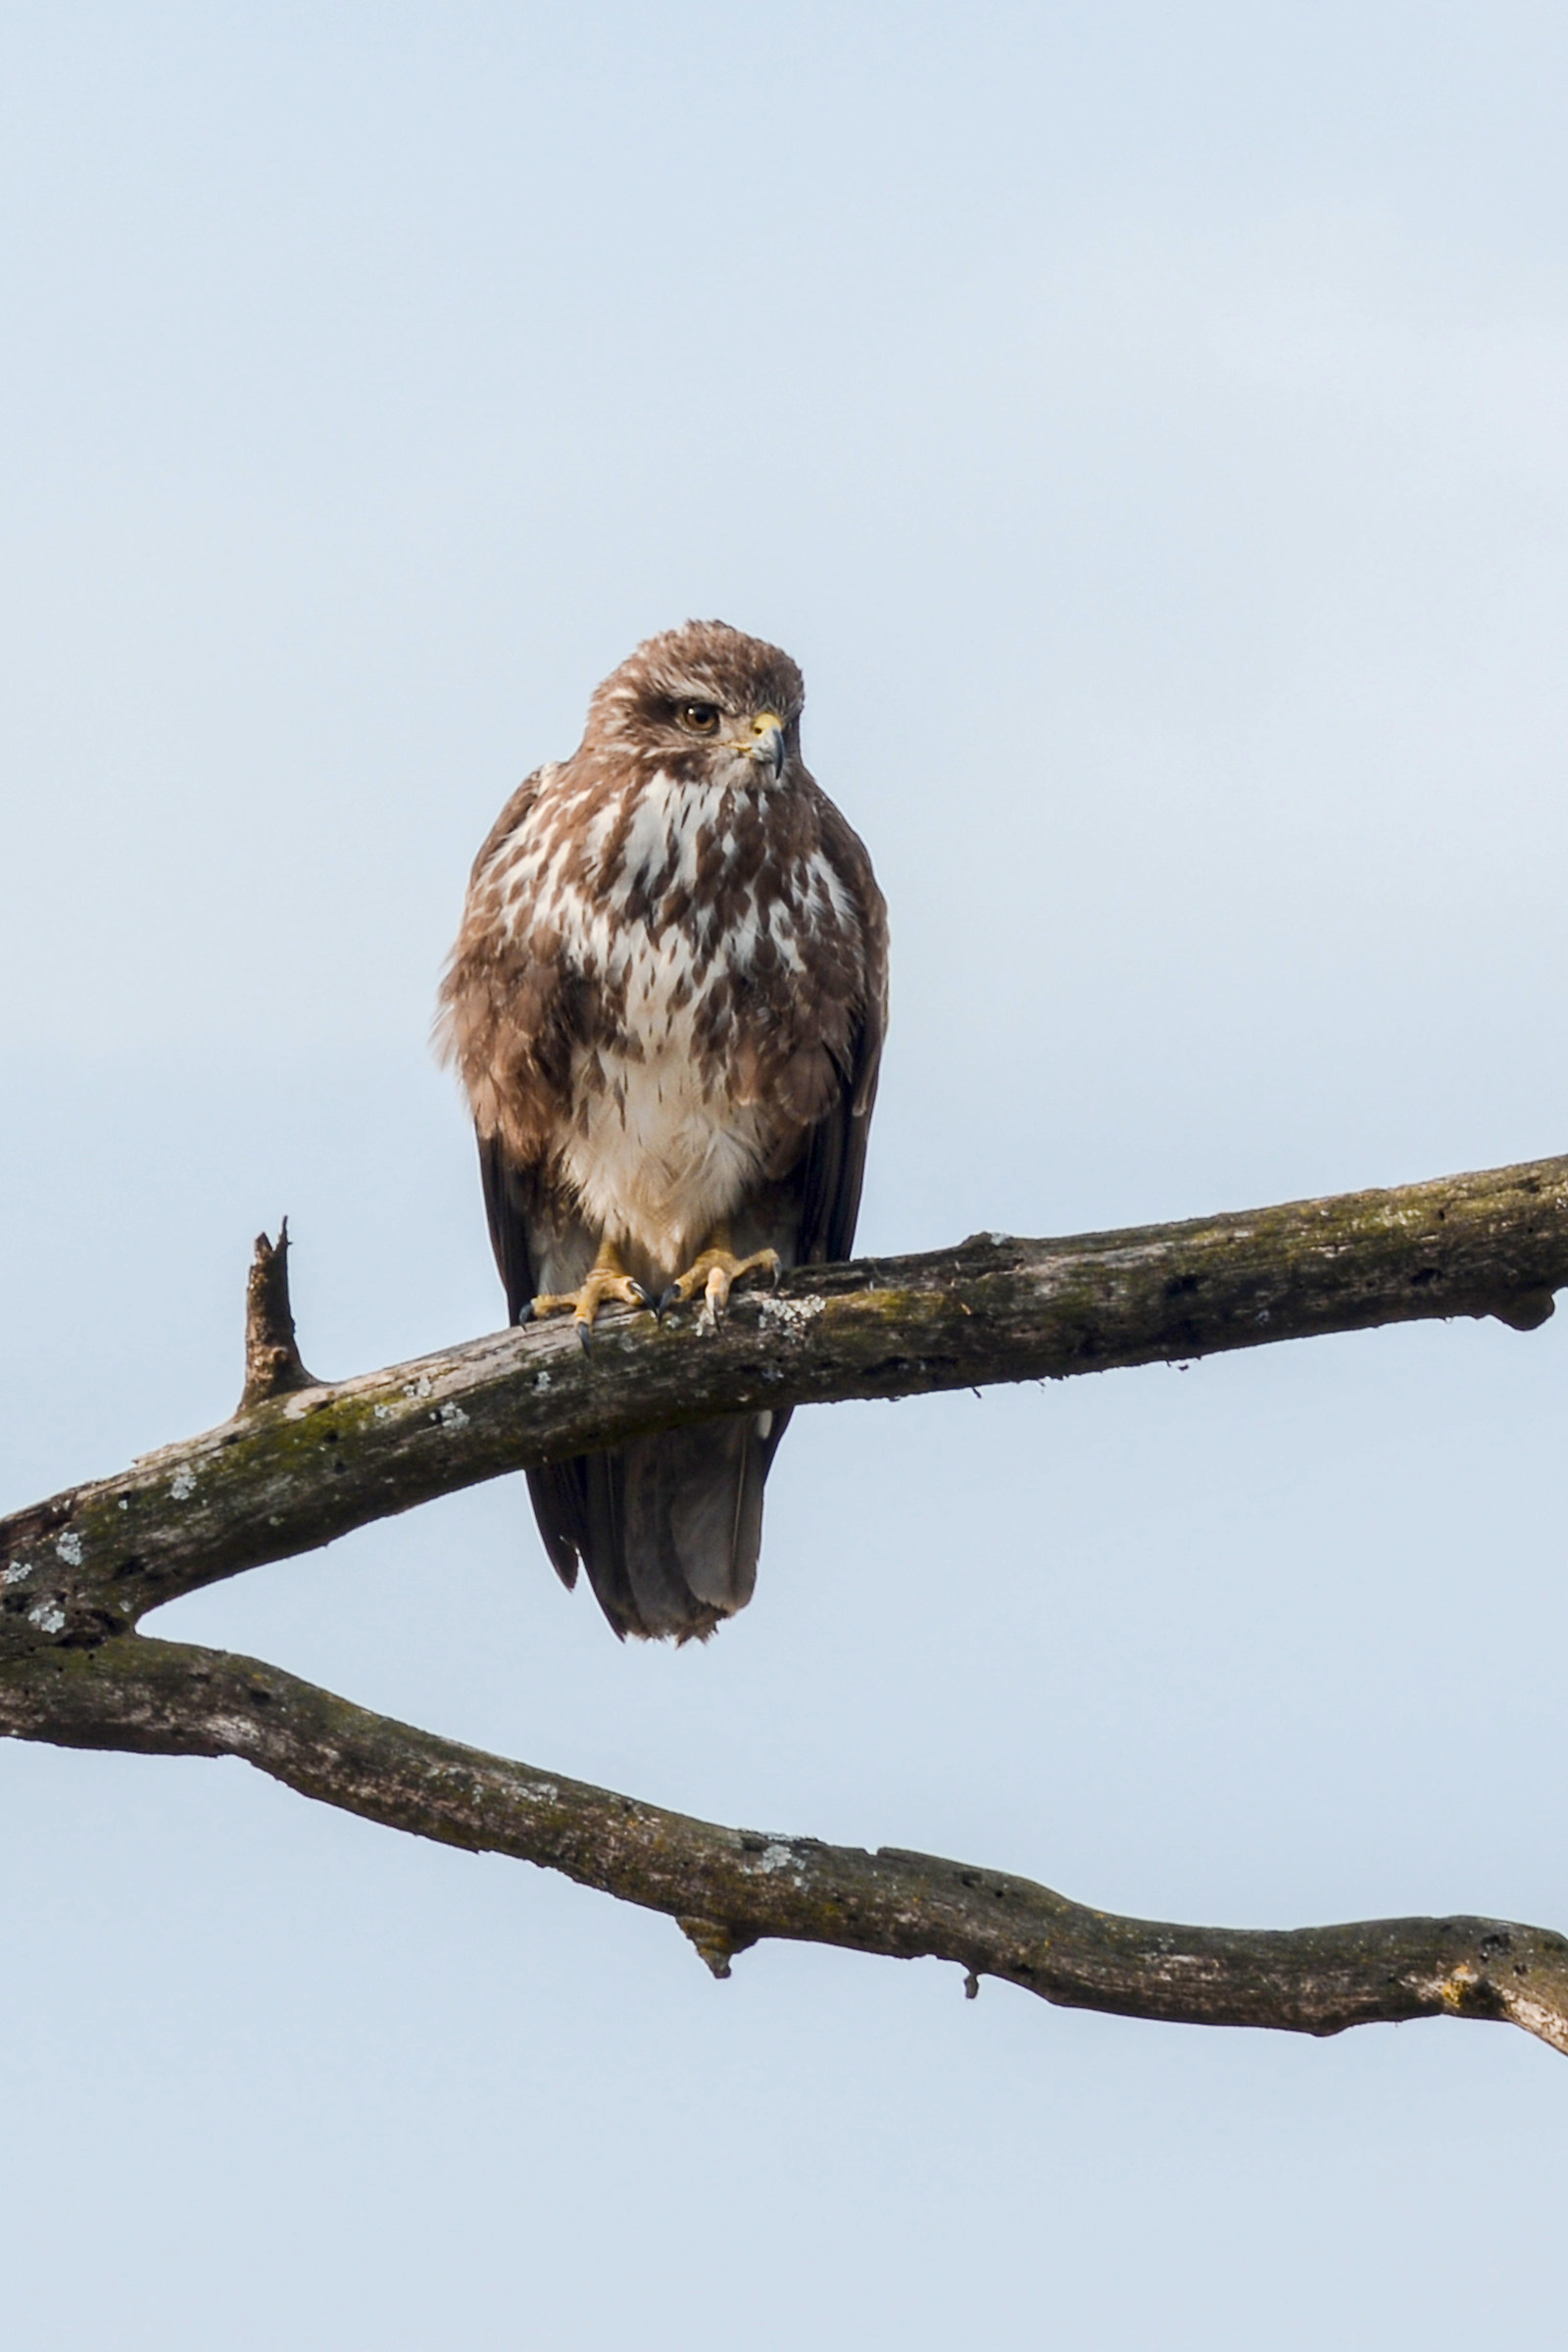 Buzzard posing ..... but only for a moment...